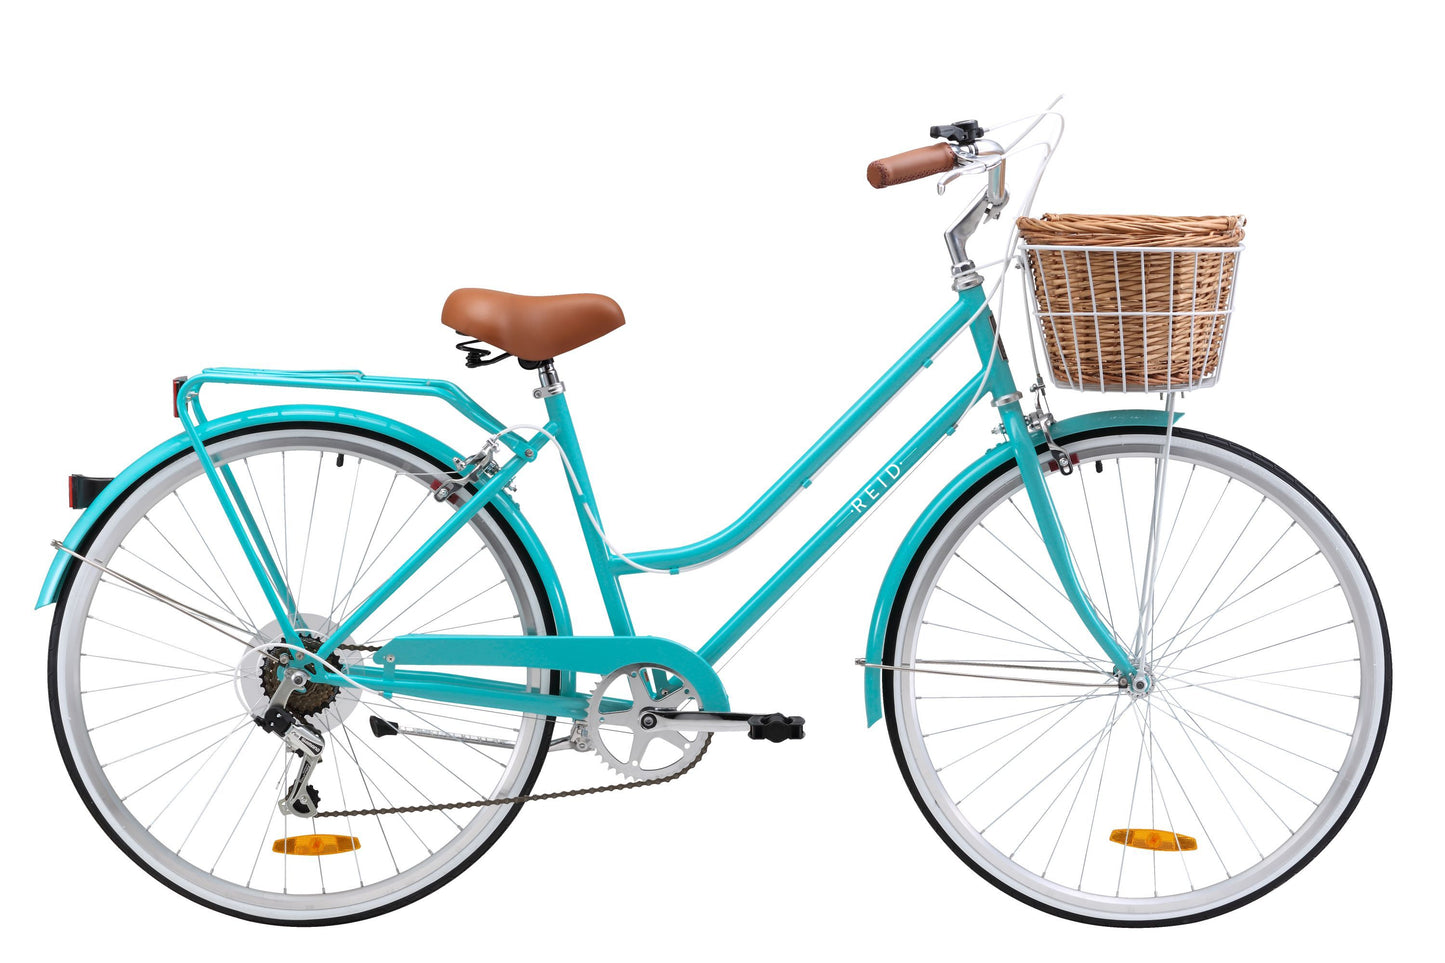 Ladies Classic Plus Vintage Bike in Turquoise with 7-speed Shimano gearing from Reid Cycles Australia